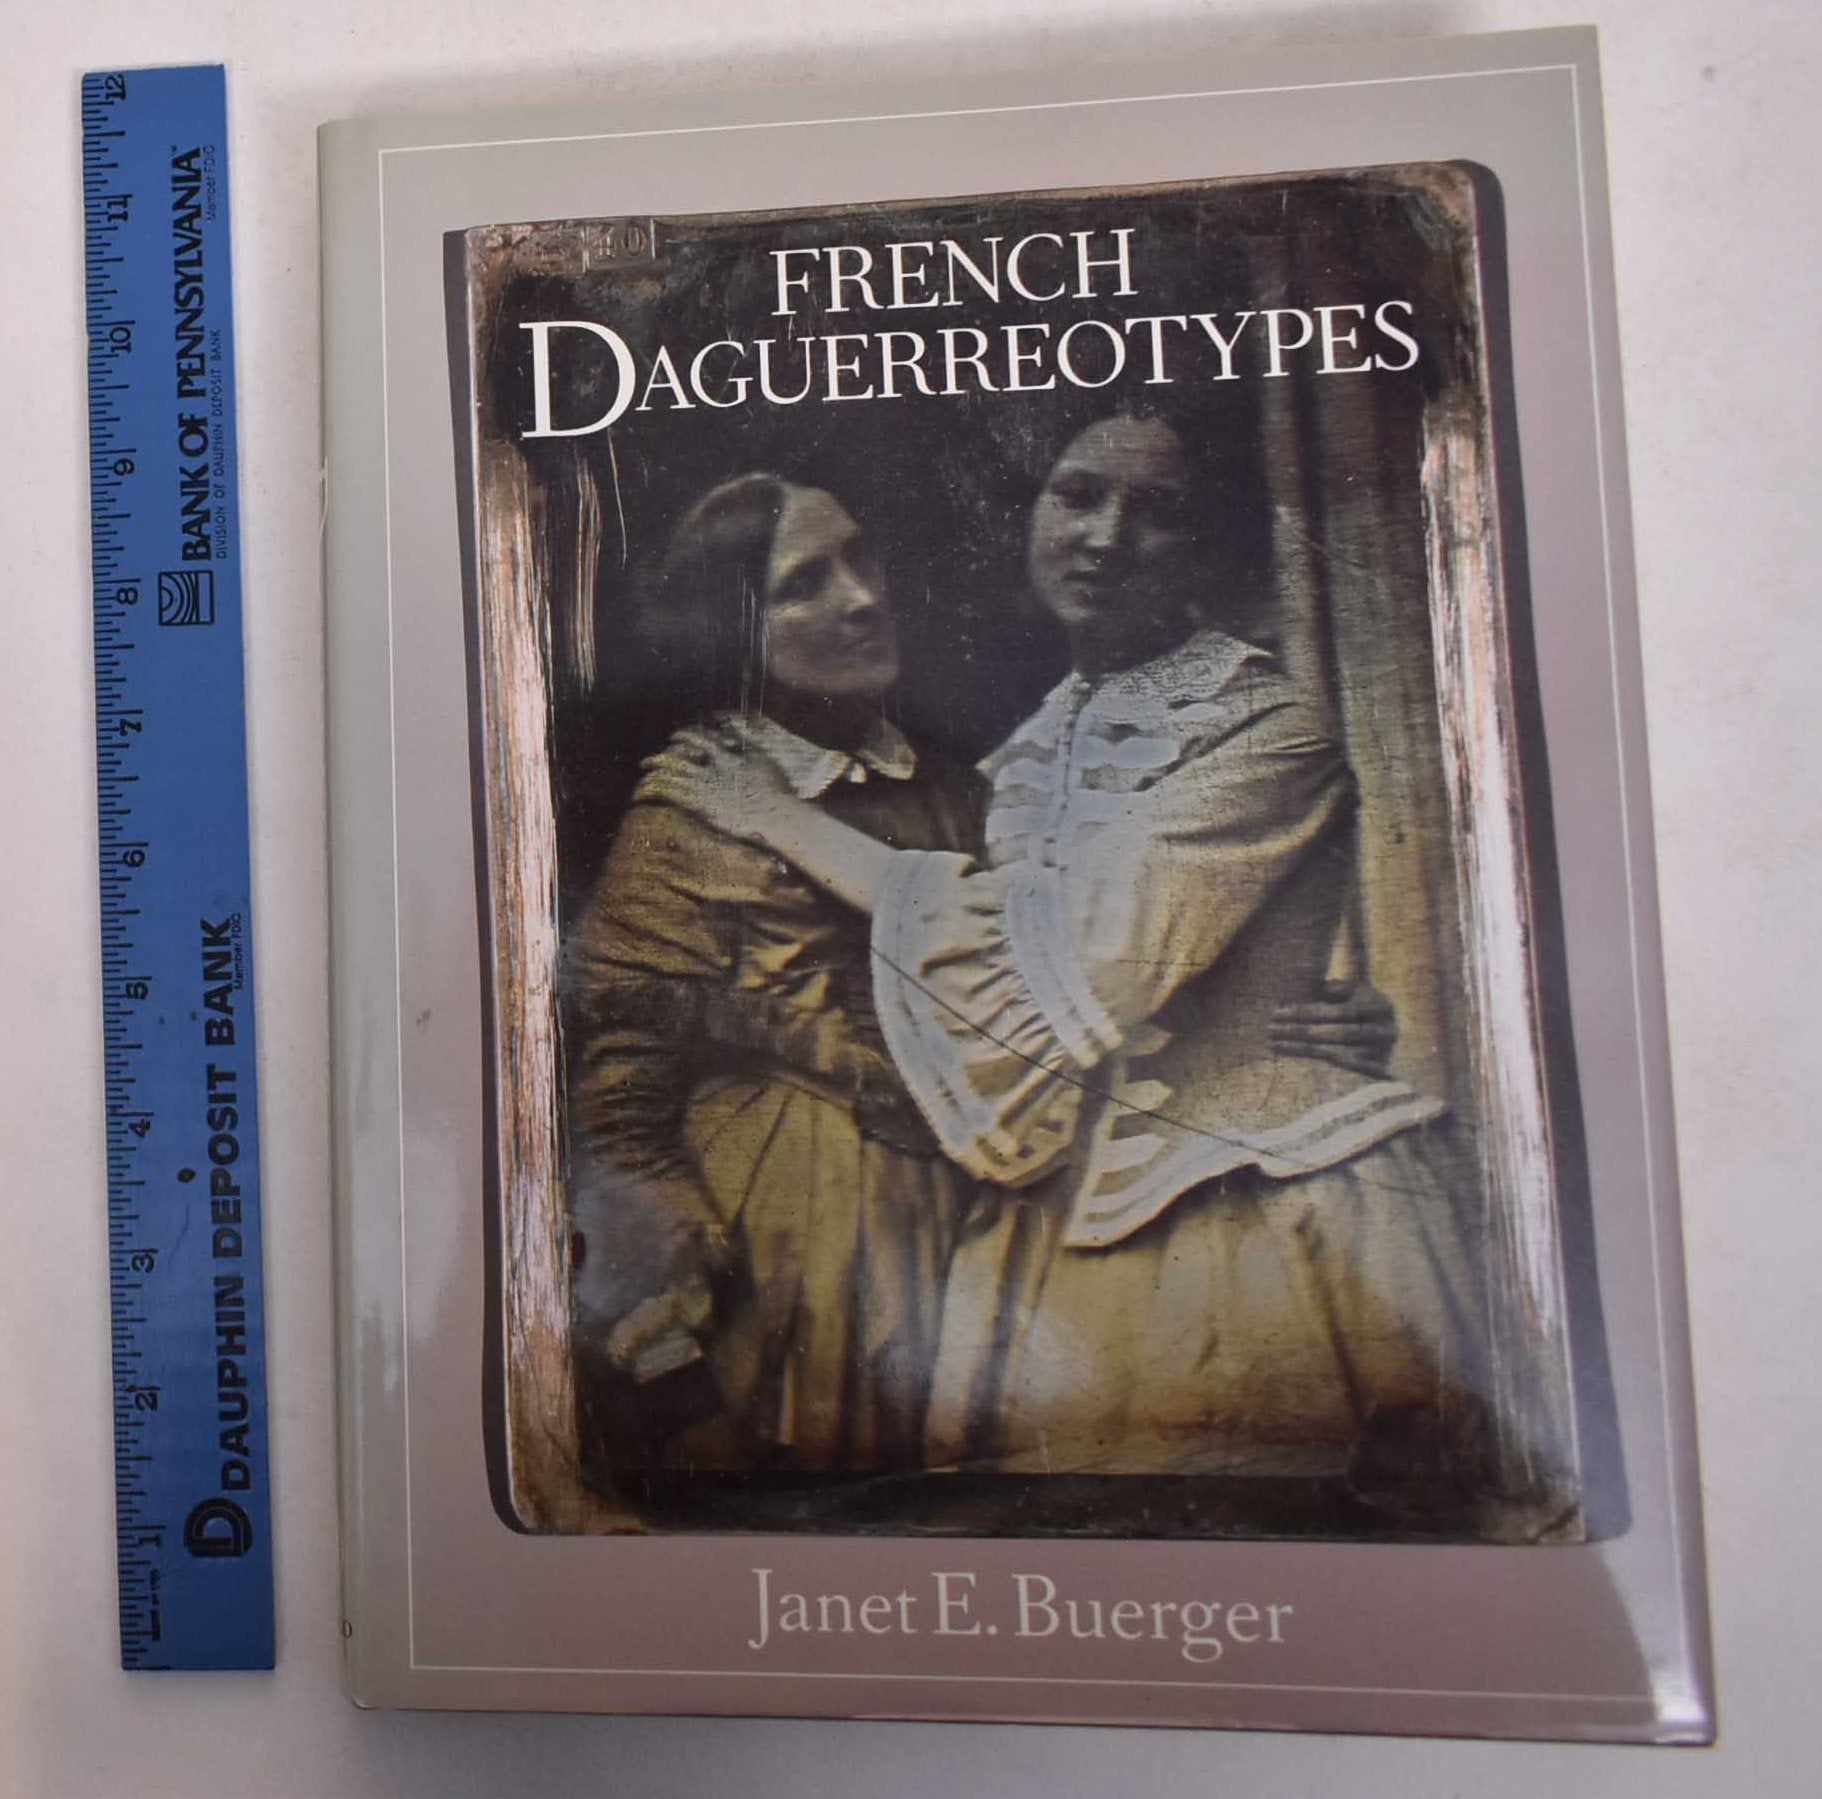 French Daguerreotypes | Janet E. Buerger